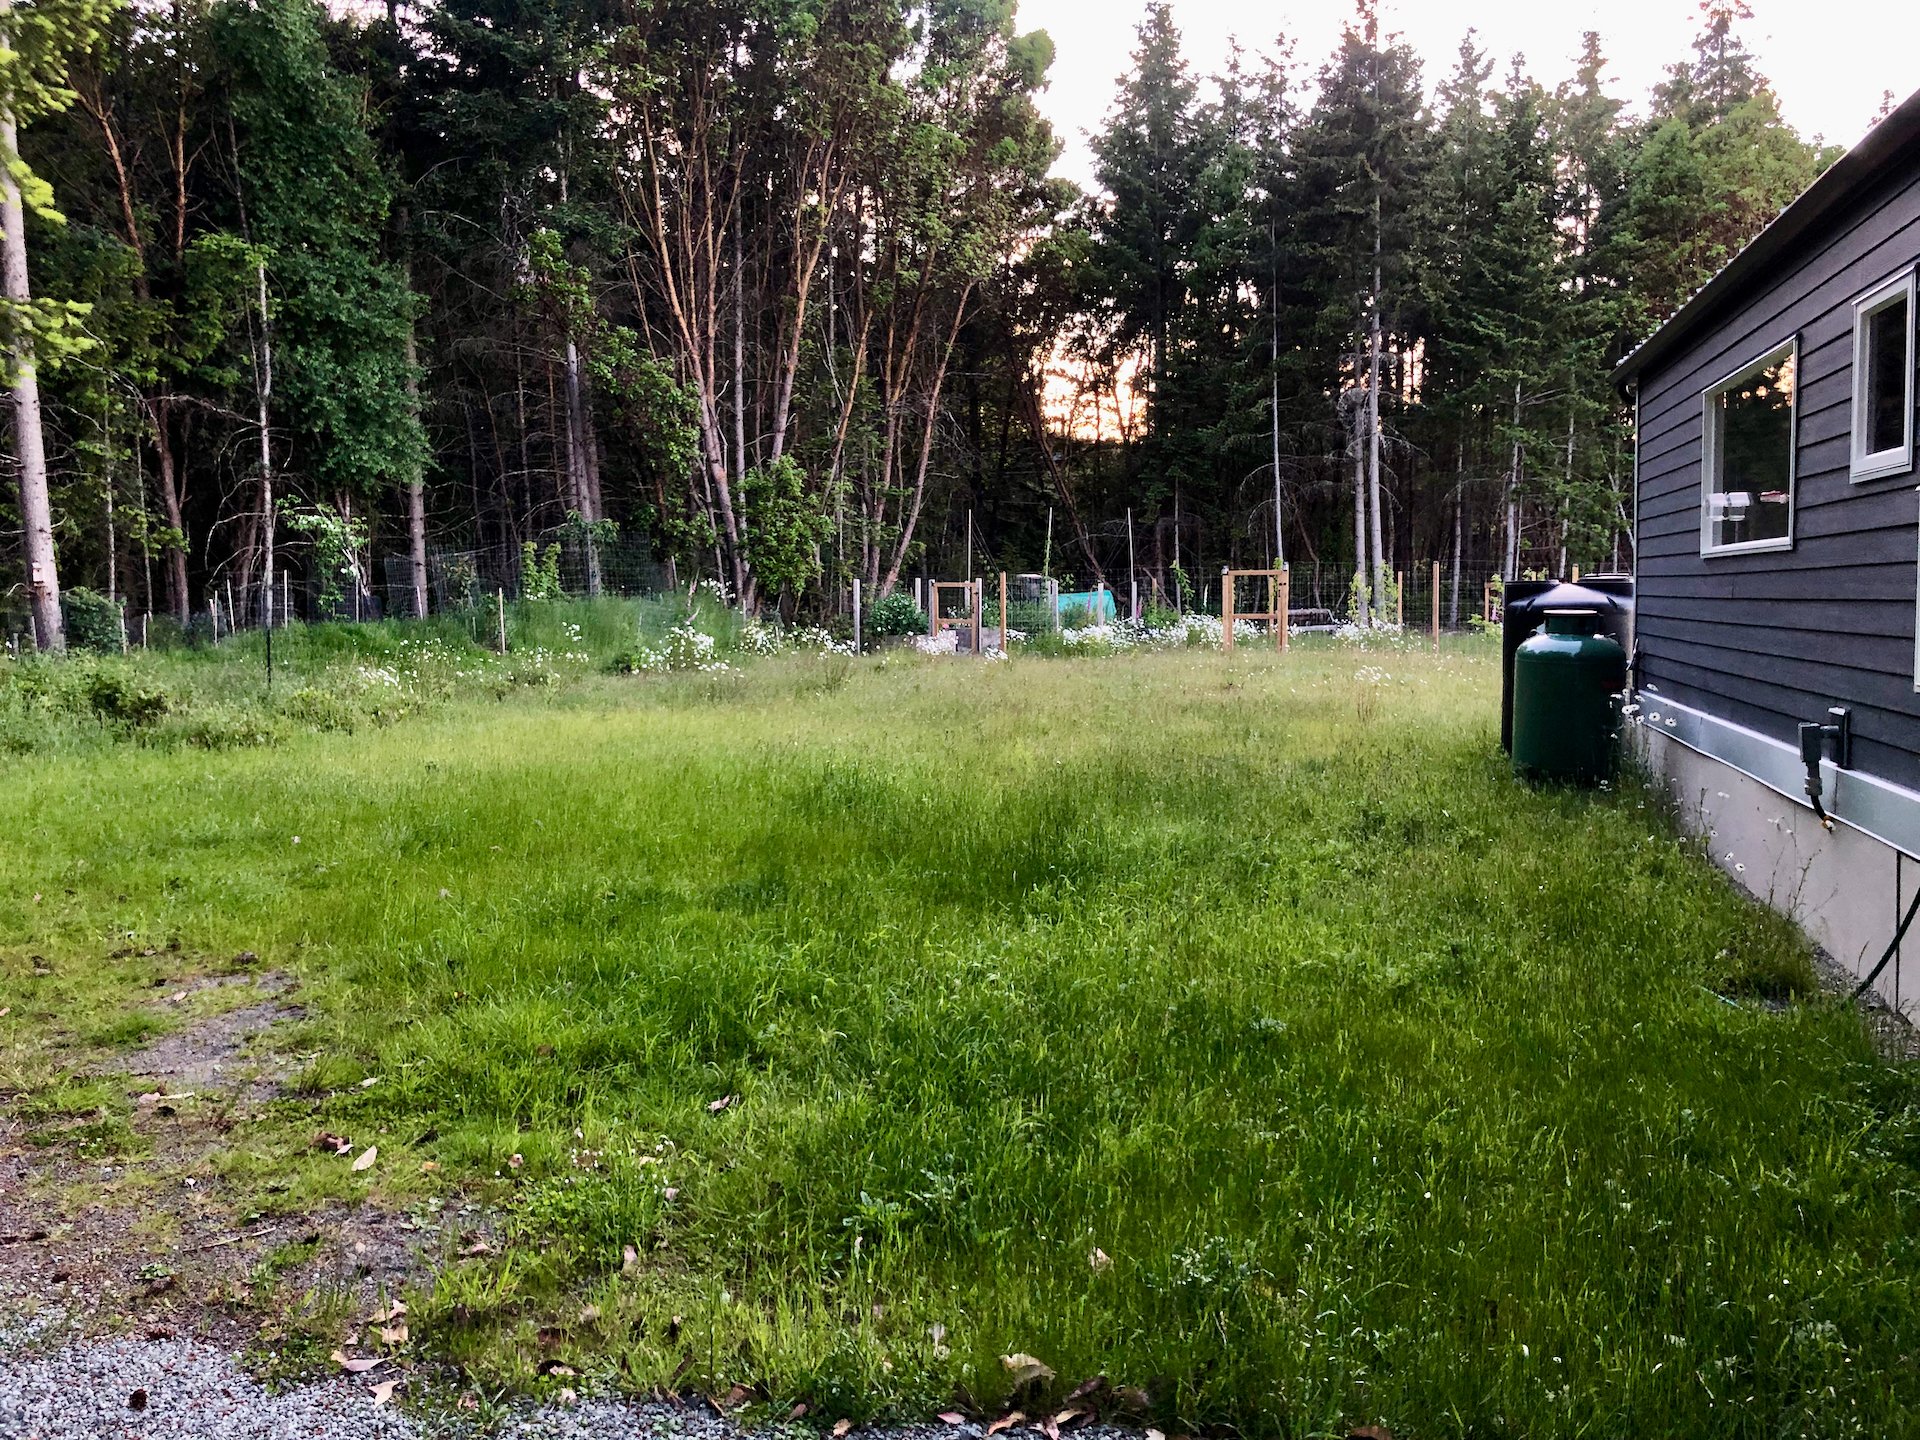  And the backyard - also a bit long. 